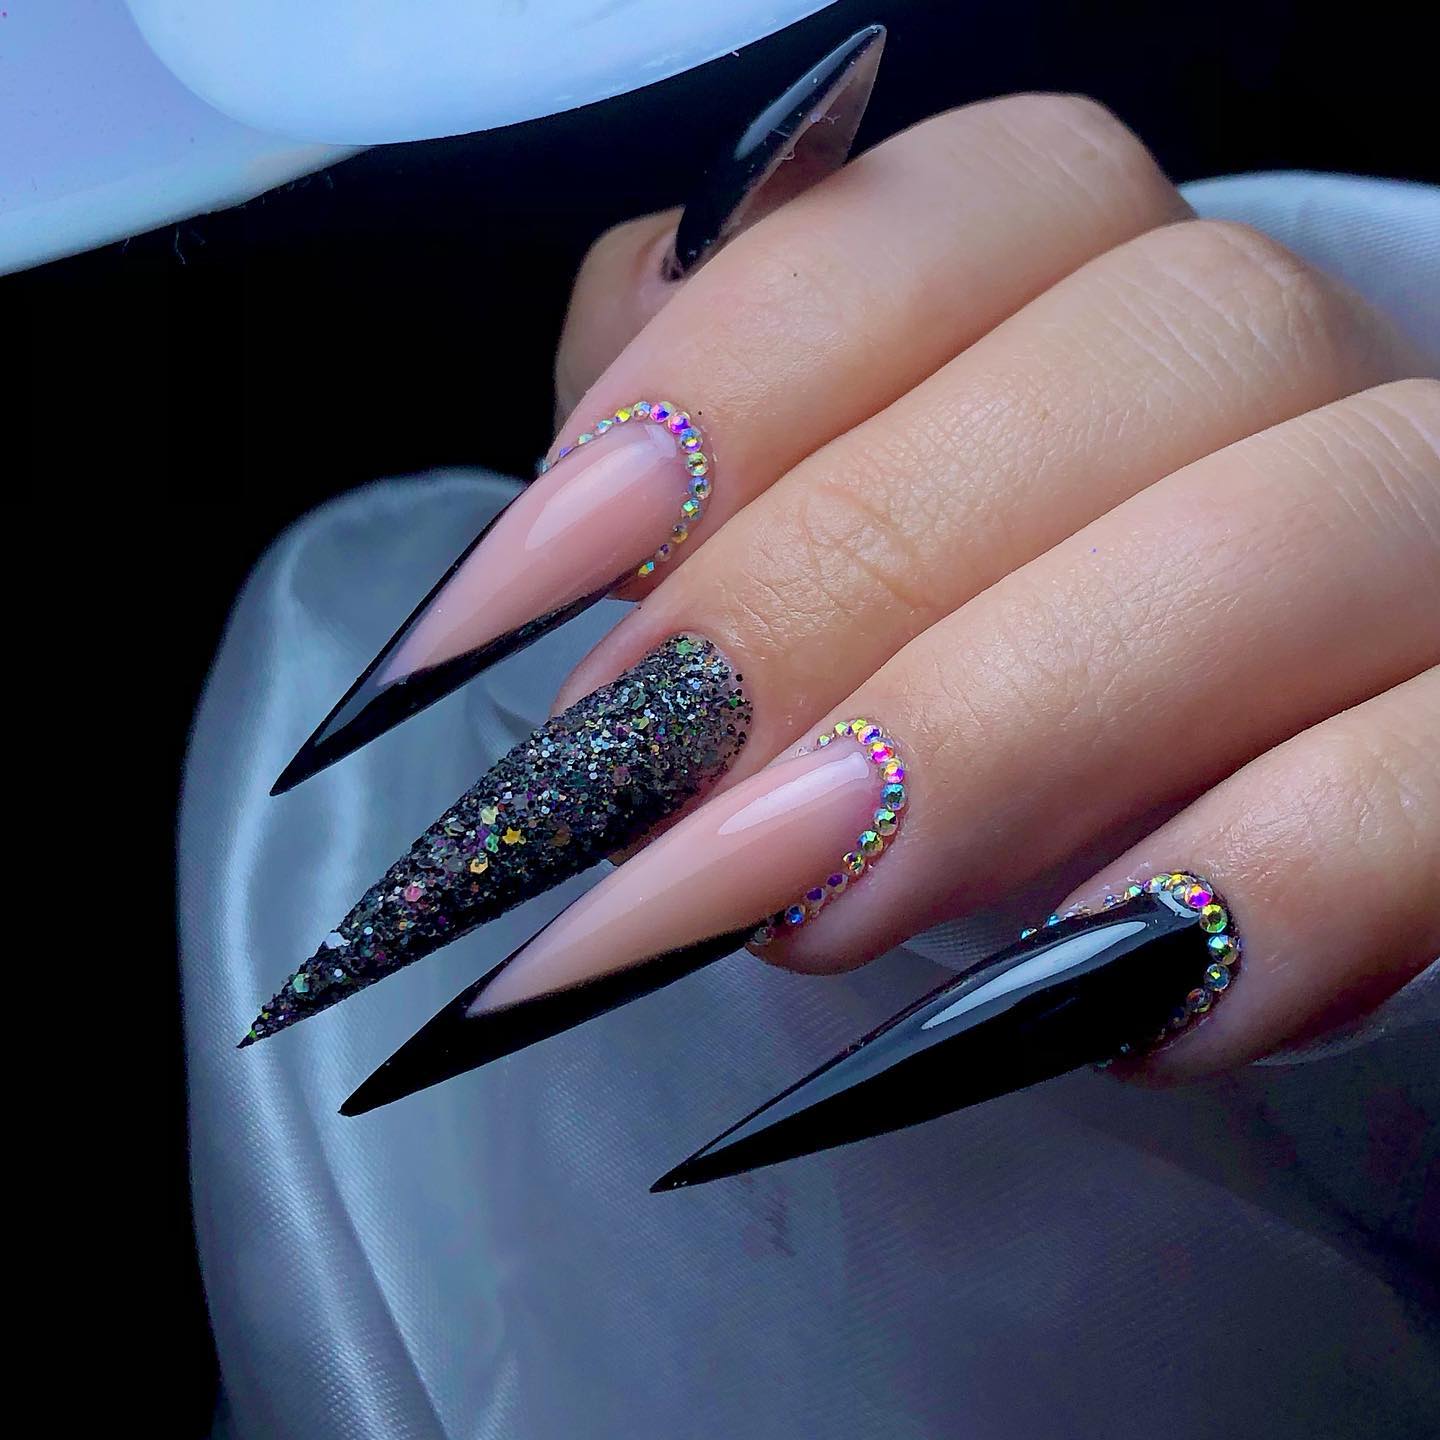 3 Long Acrylic Stiletto Black Nails With Glitter And Rhinestones 